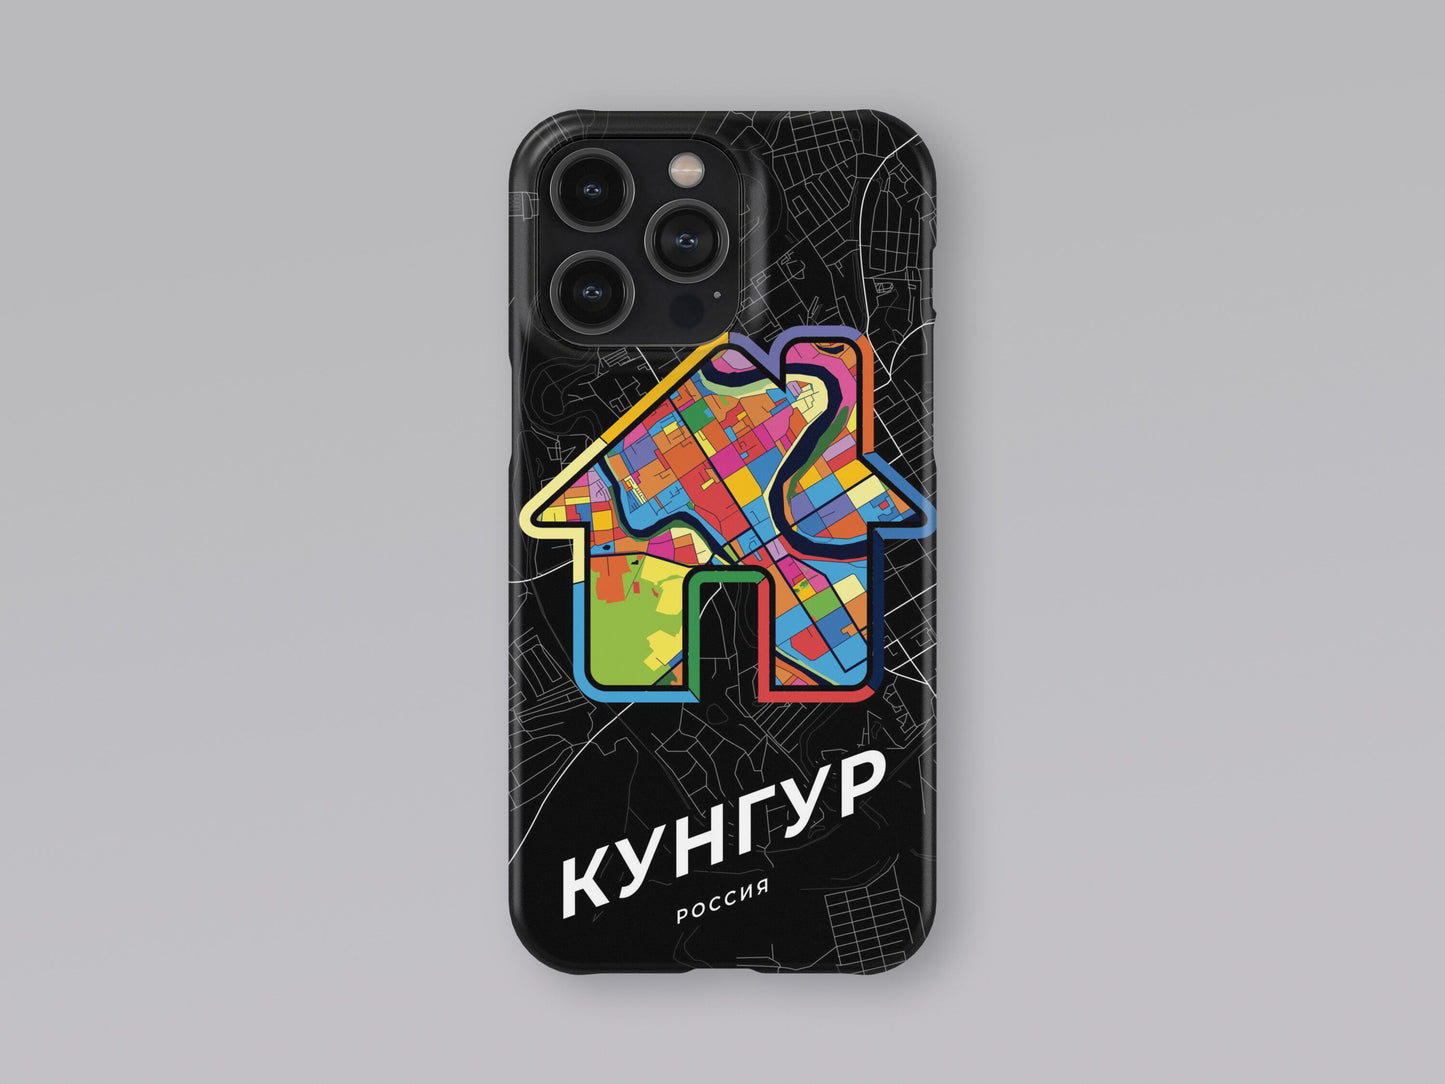 Kungur Russia slim phone case with colorful icon. Birthday, wedding or housewarming gift. Couple match cases. 3